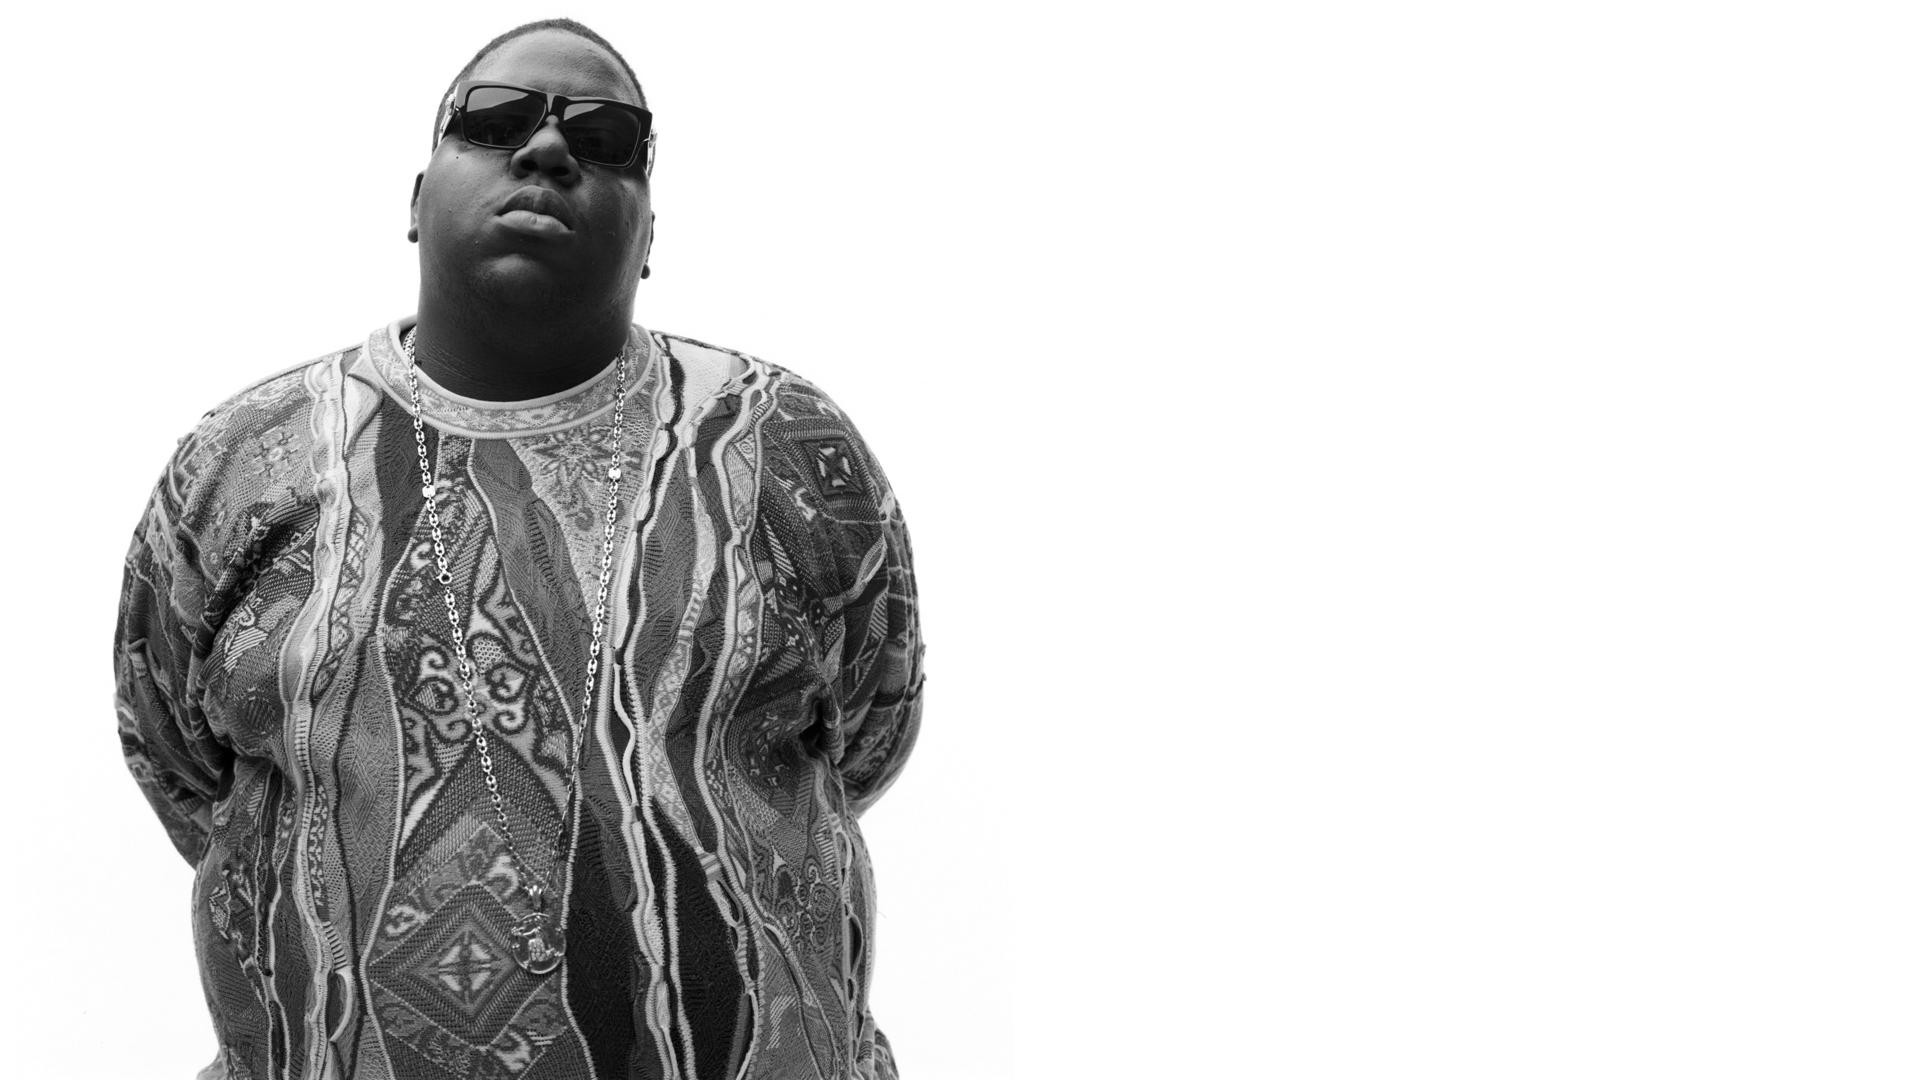 1920x1080 ... backgrounds for biggie smalls white background www 8backgrounds com ...